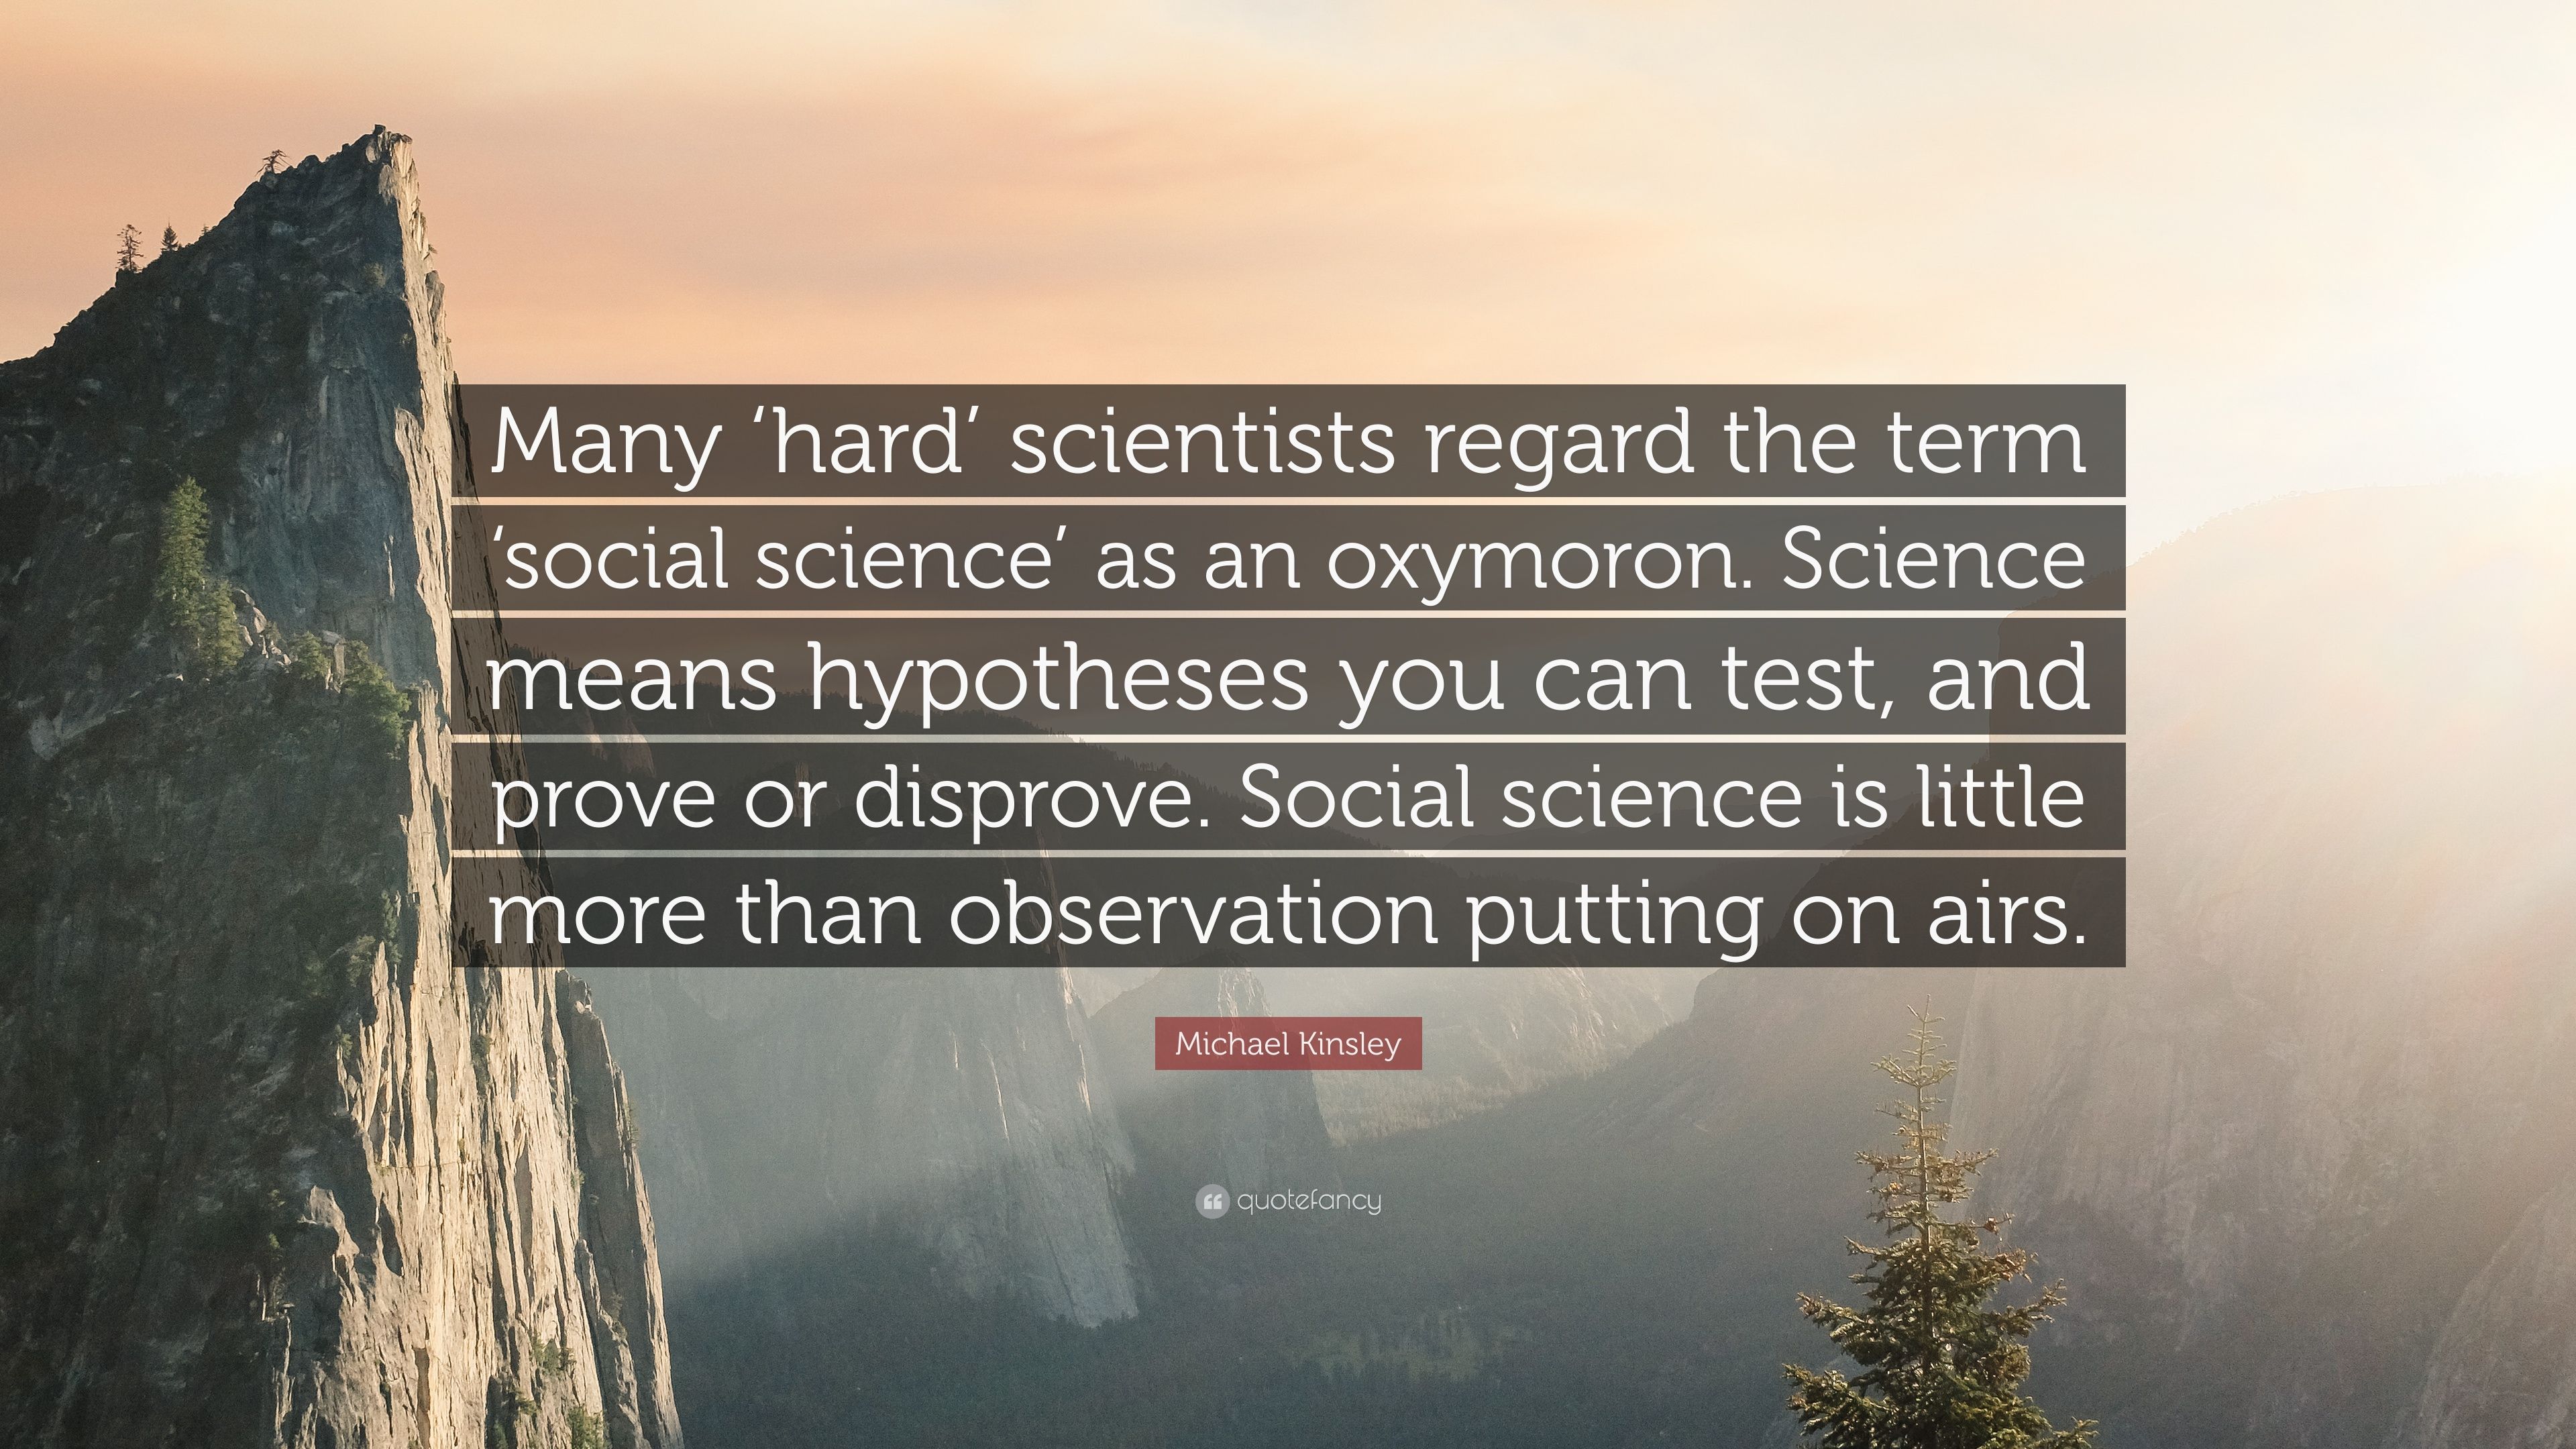 an oxymoron. Science means hypotheses .quotefancy.com